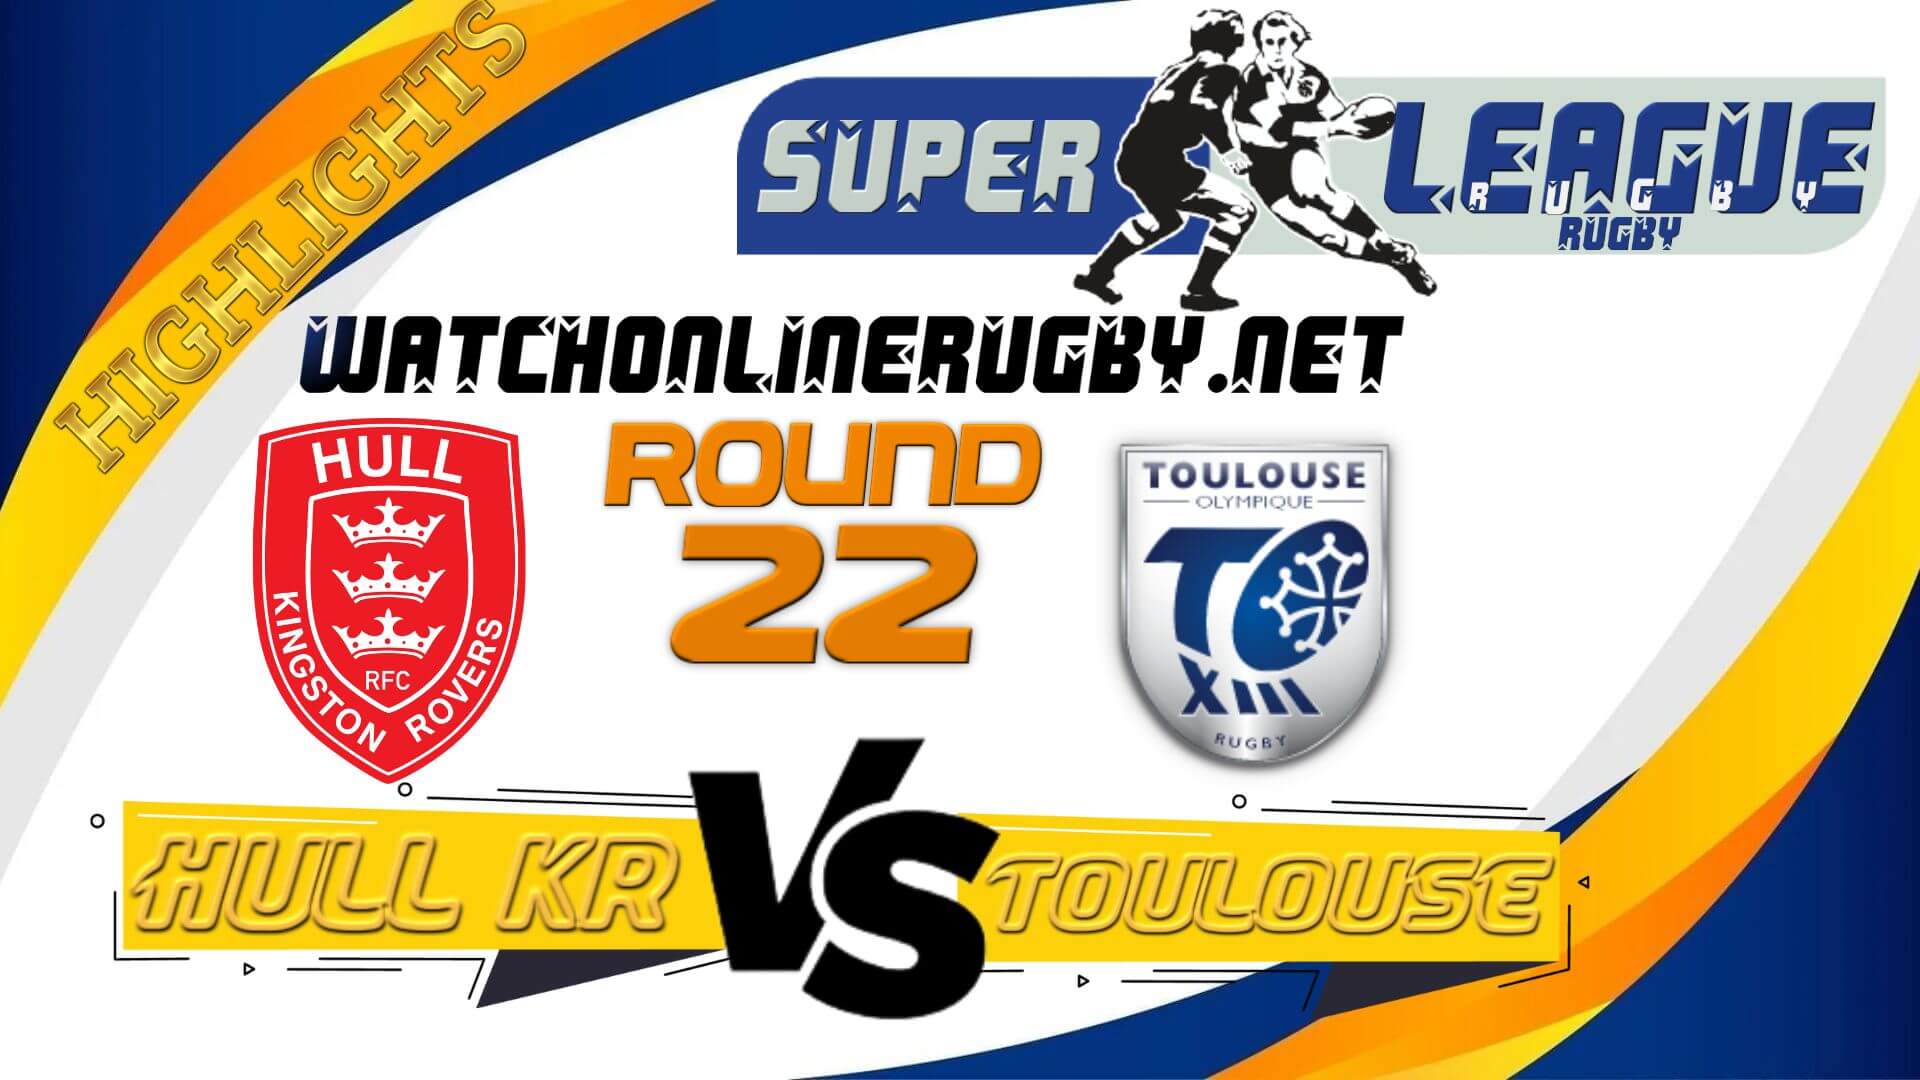 Hull KR Vs Toulouse Super League Rugby 2022 RD 22